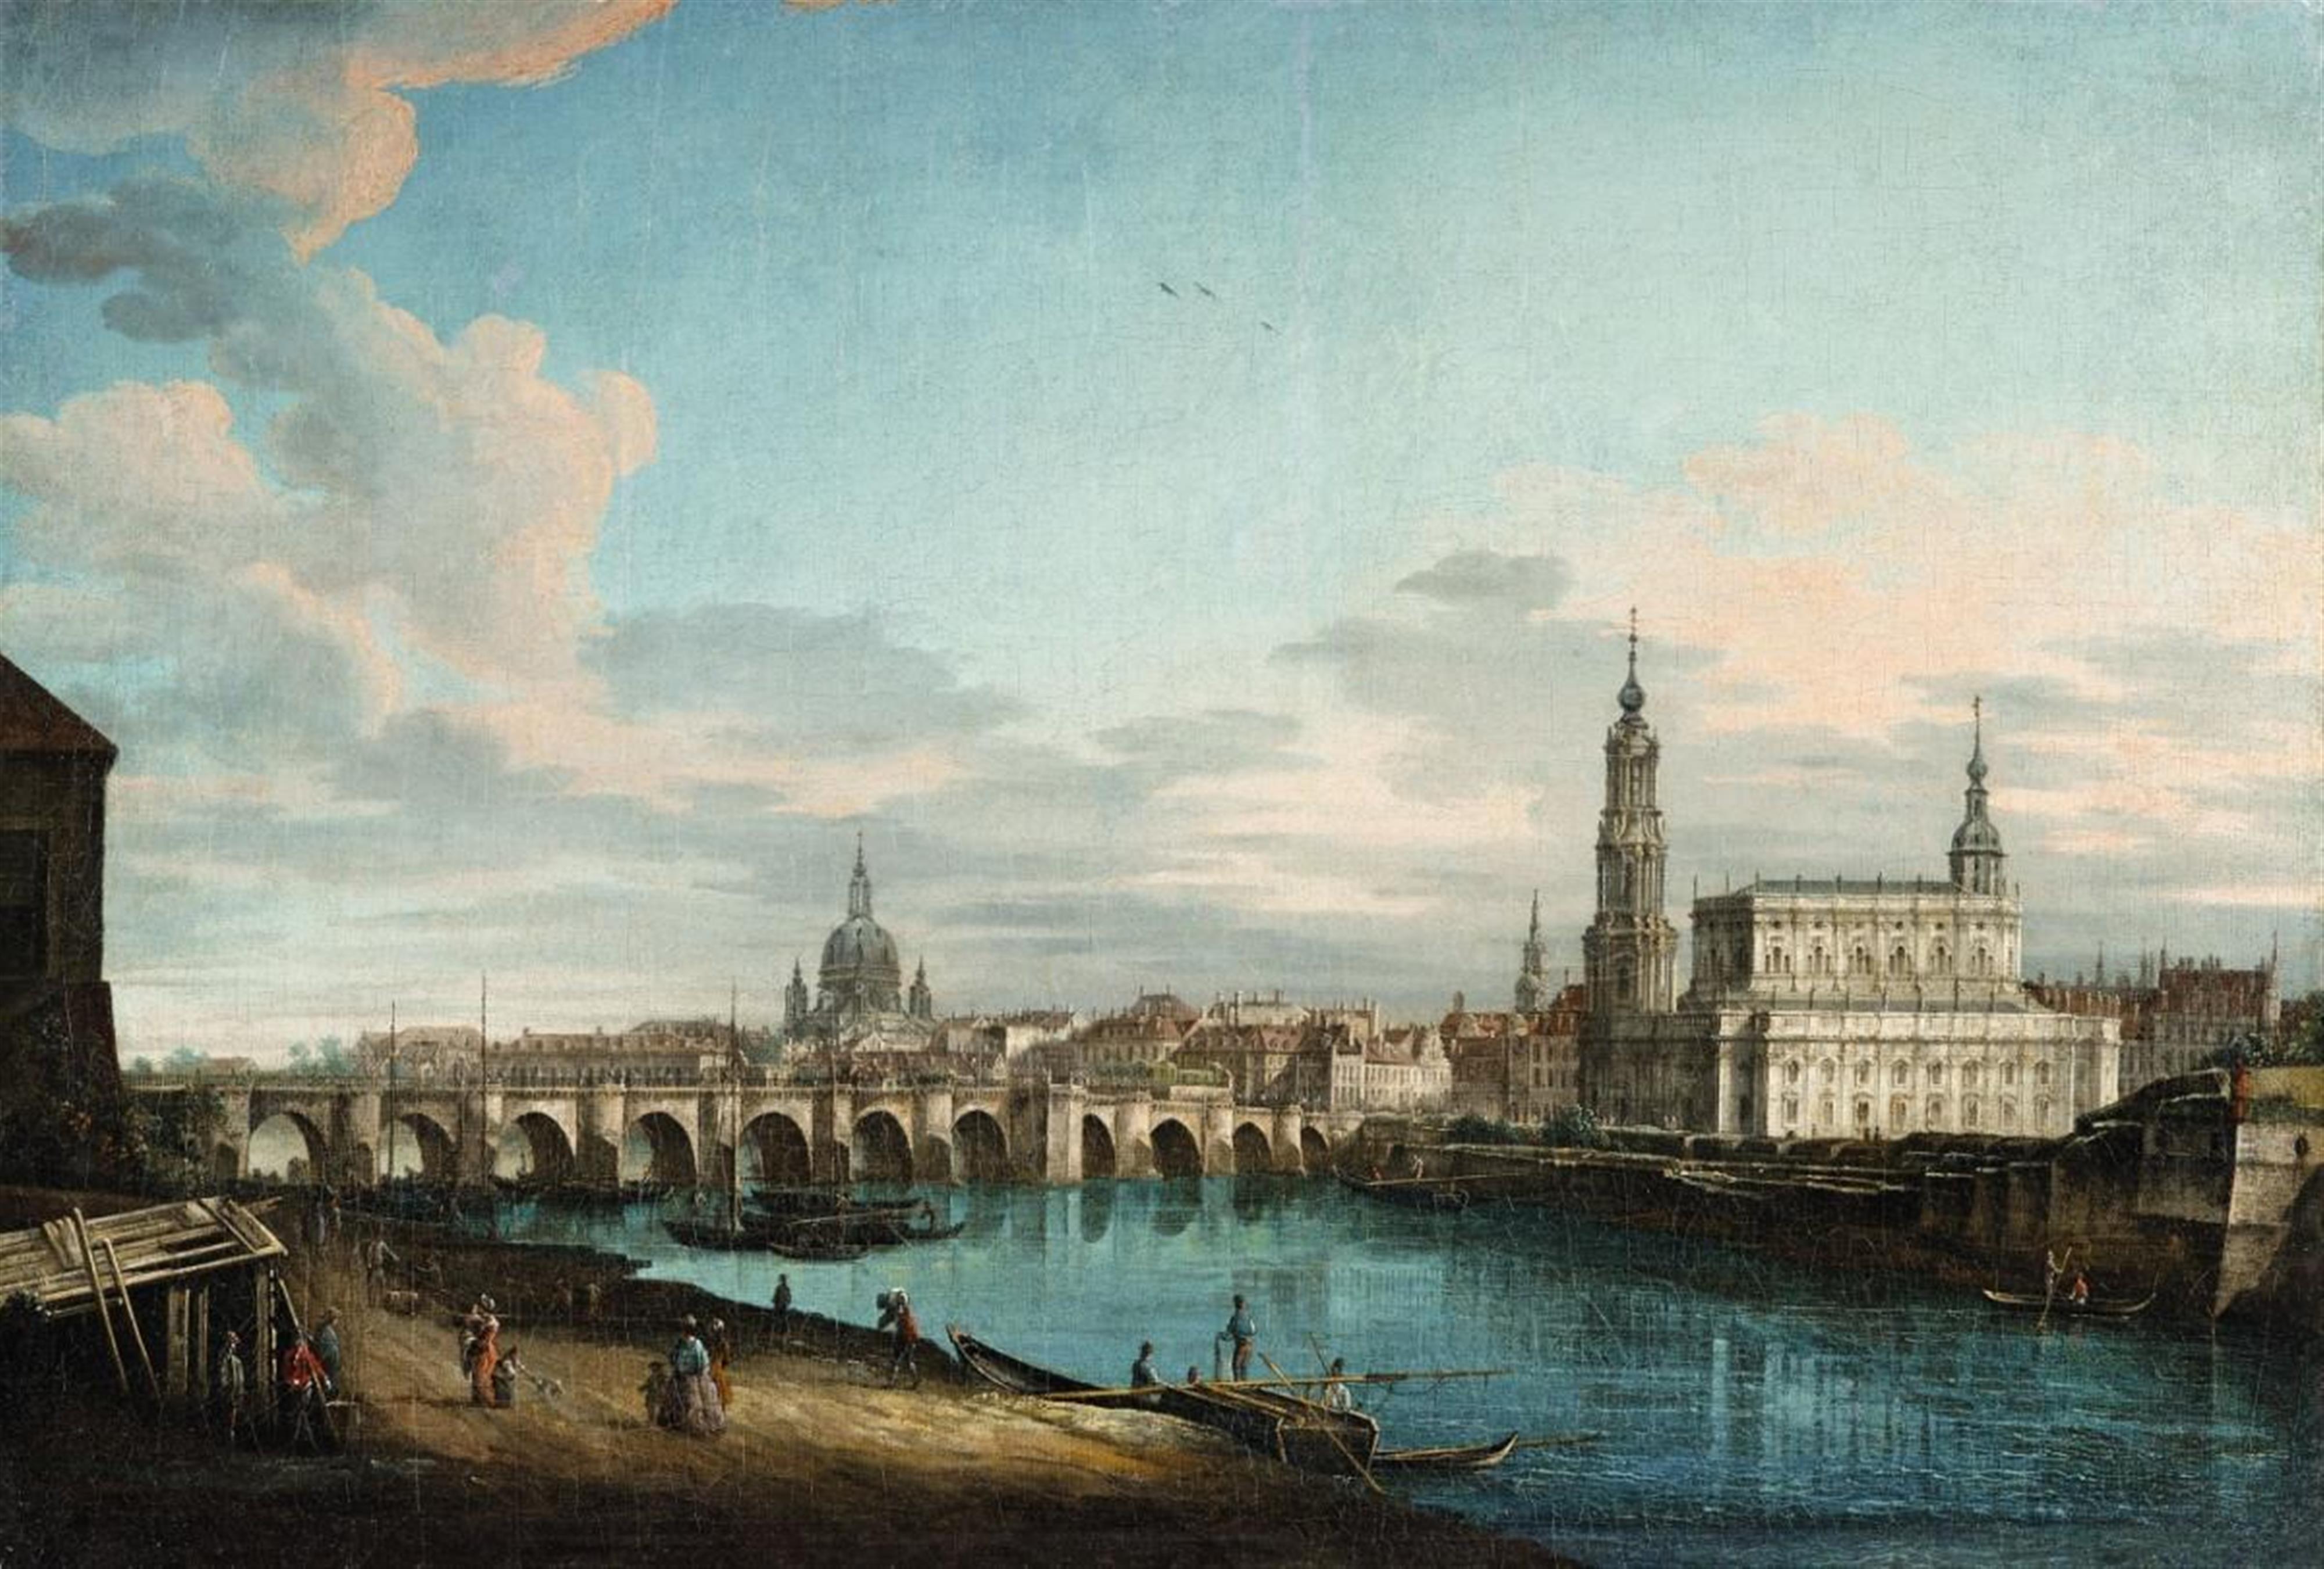 Pietro Bellotti, attributed to - A View of Dresden Seen From the Left Bank of the Elbe - image-1